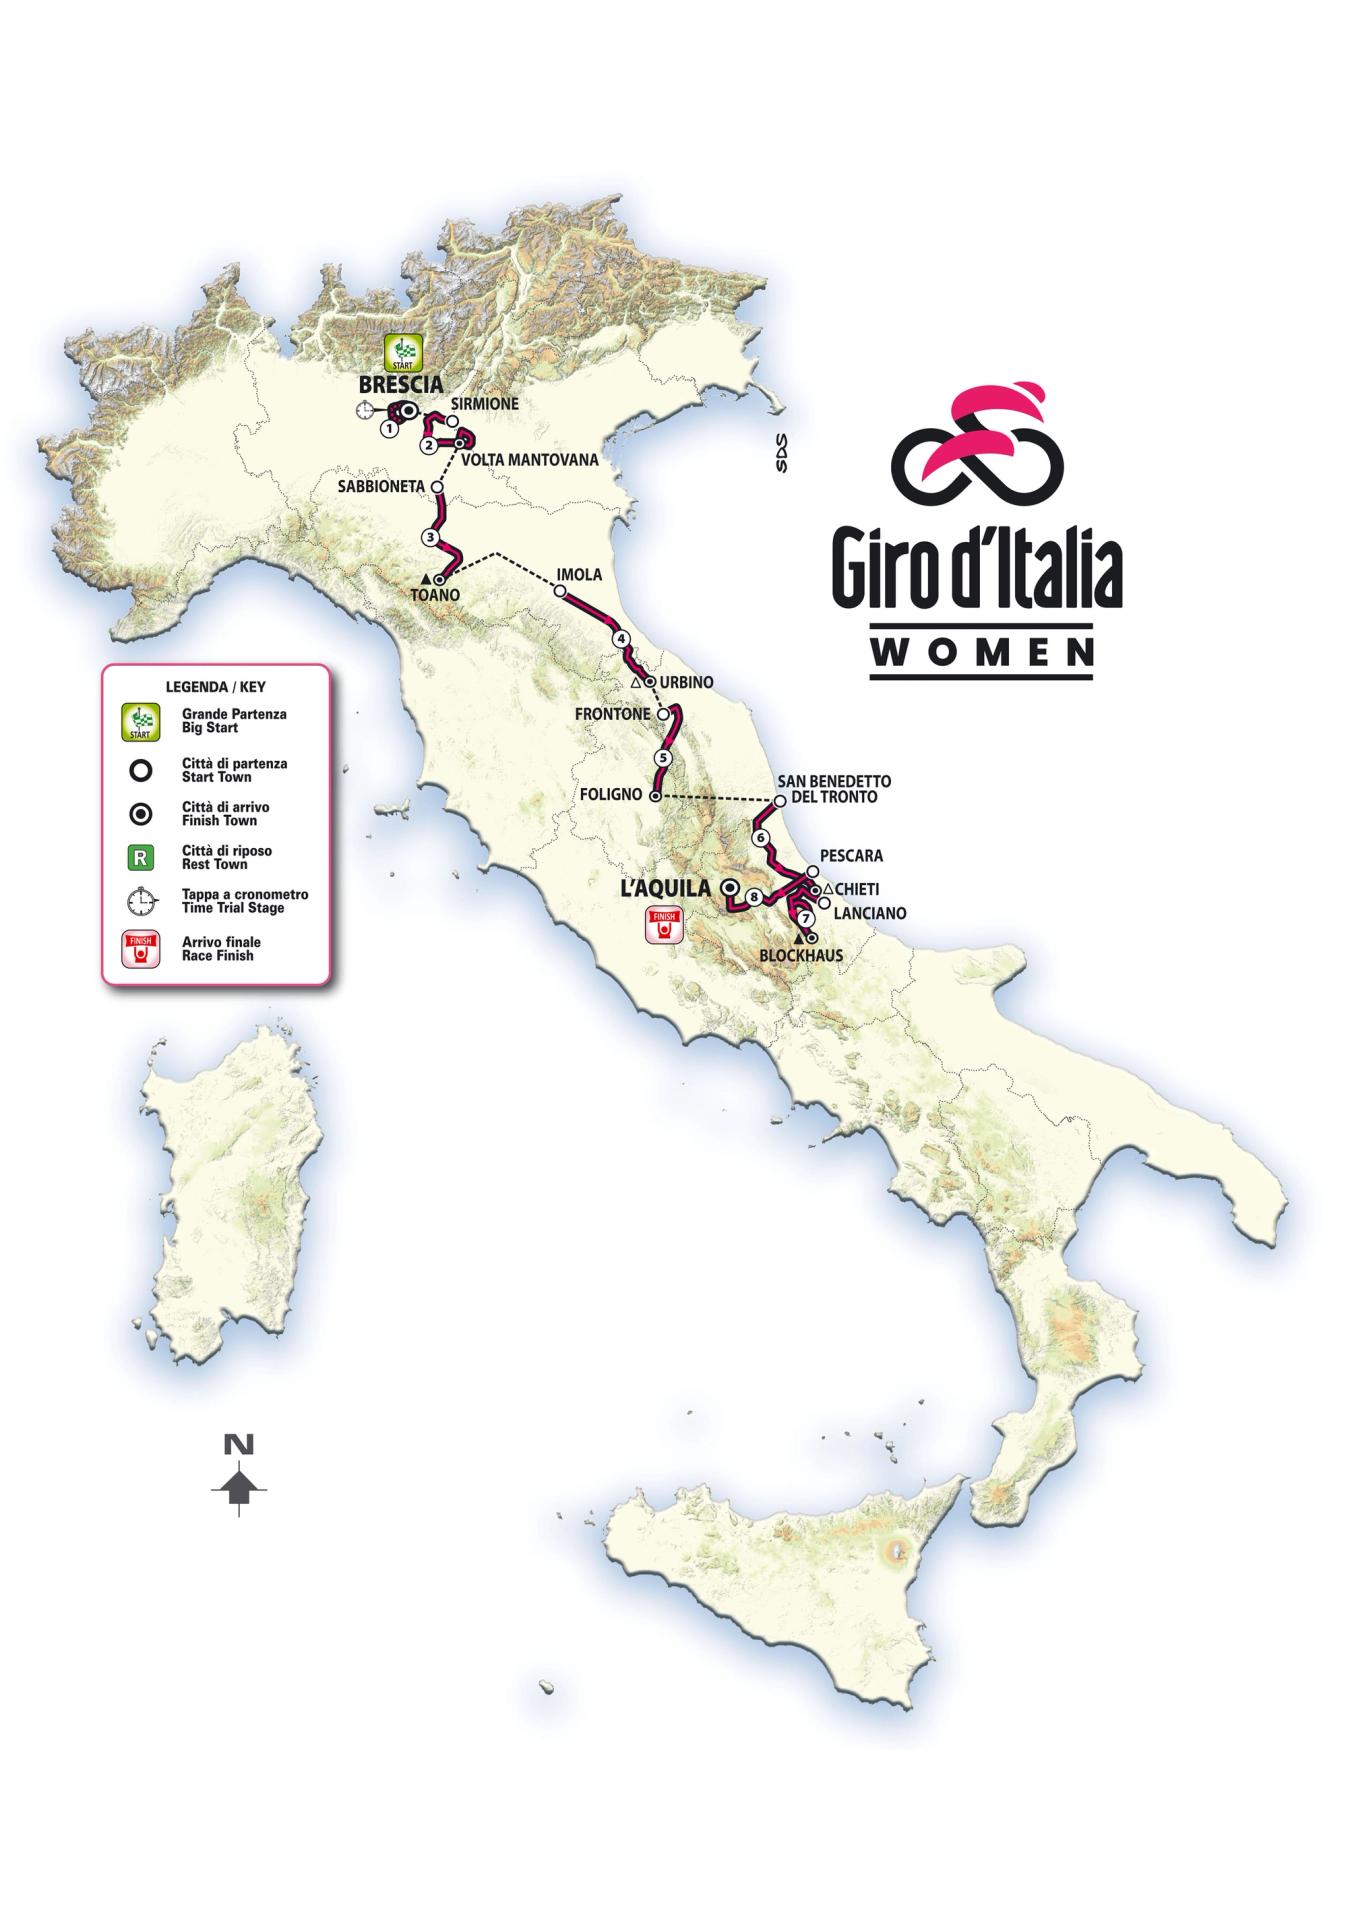 The route map for the 2024 Giro d'Italia Women